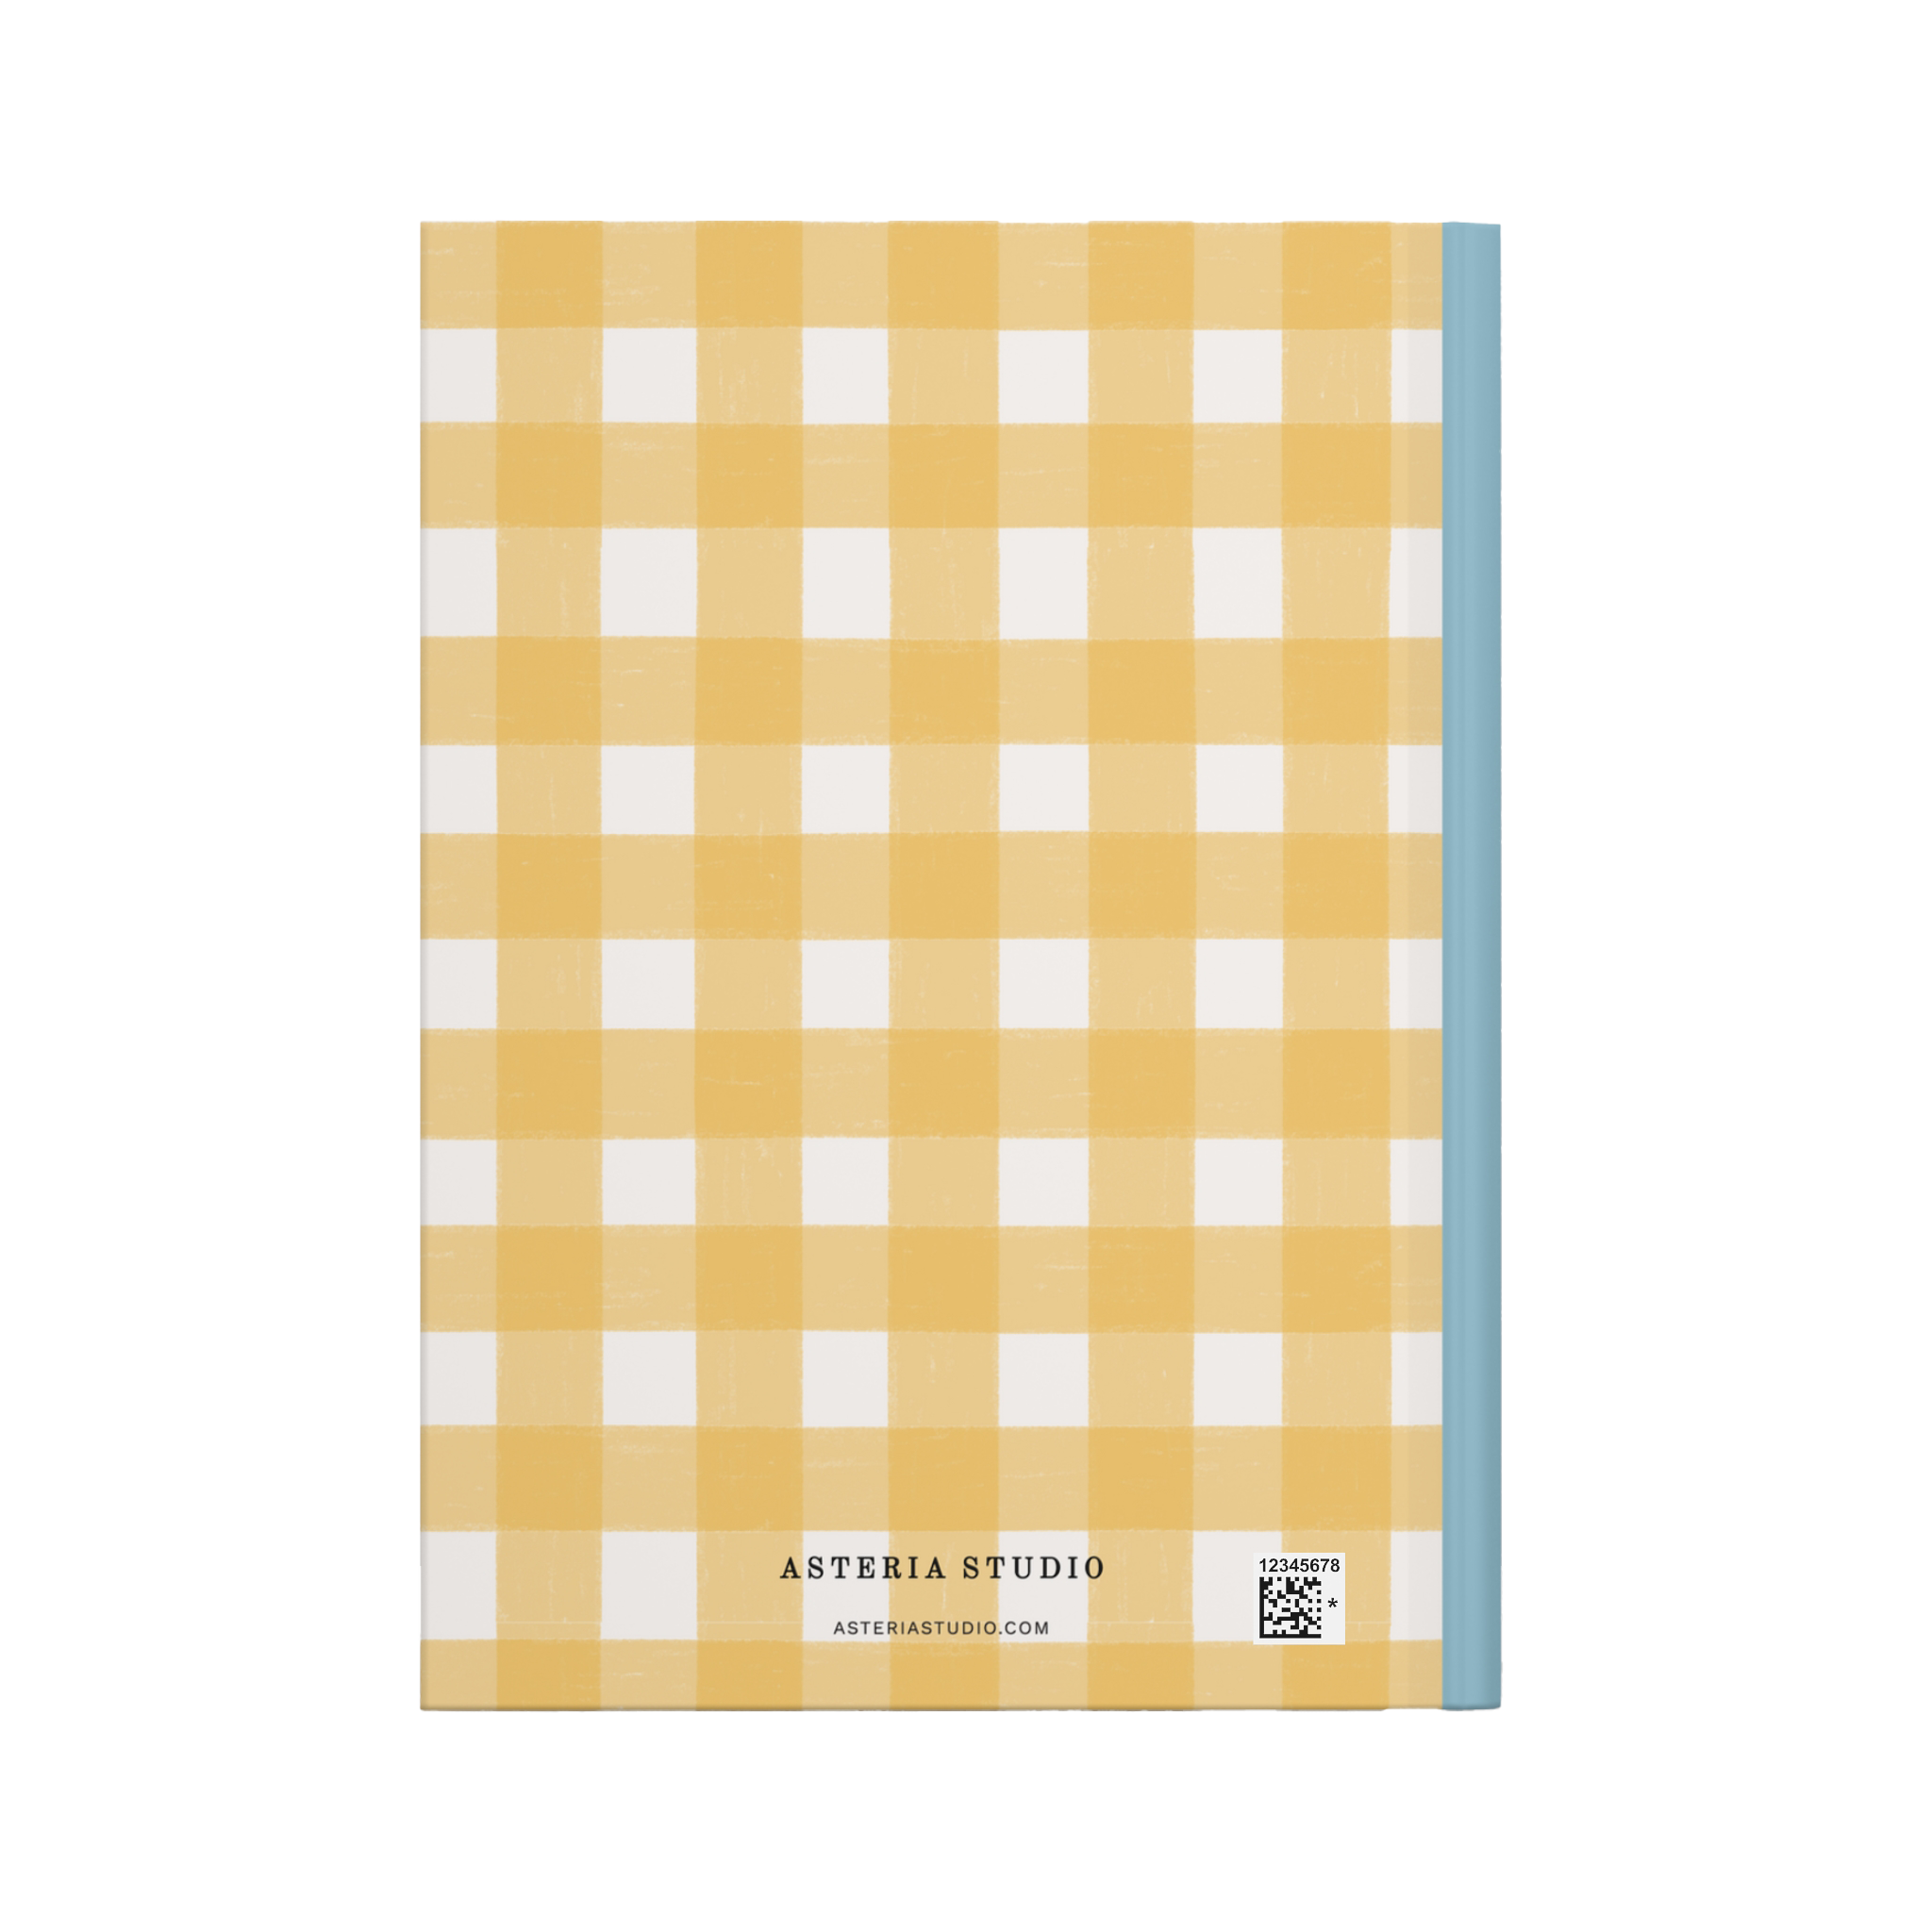 Journal in Yellow Gingham